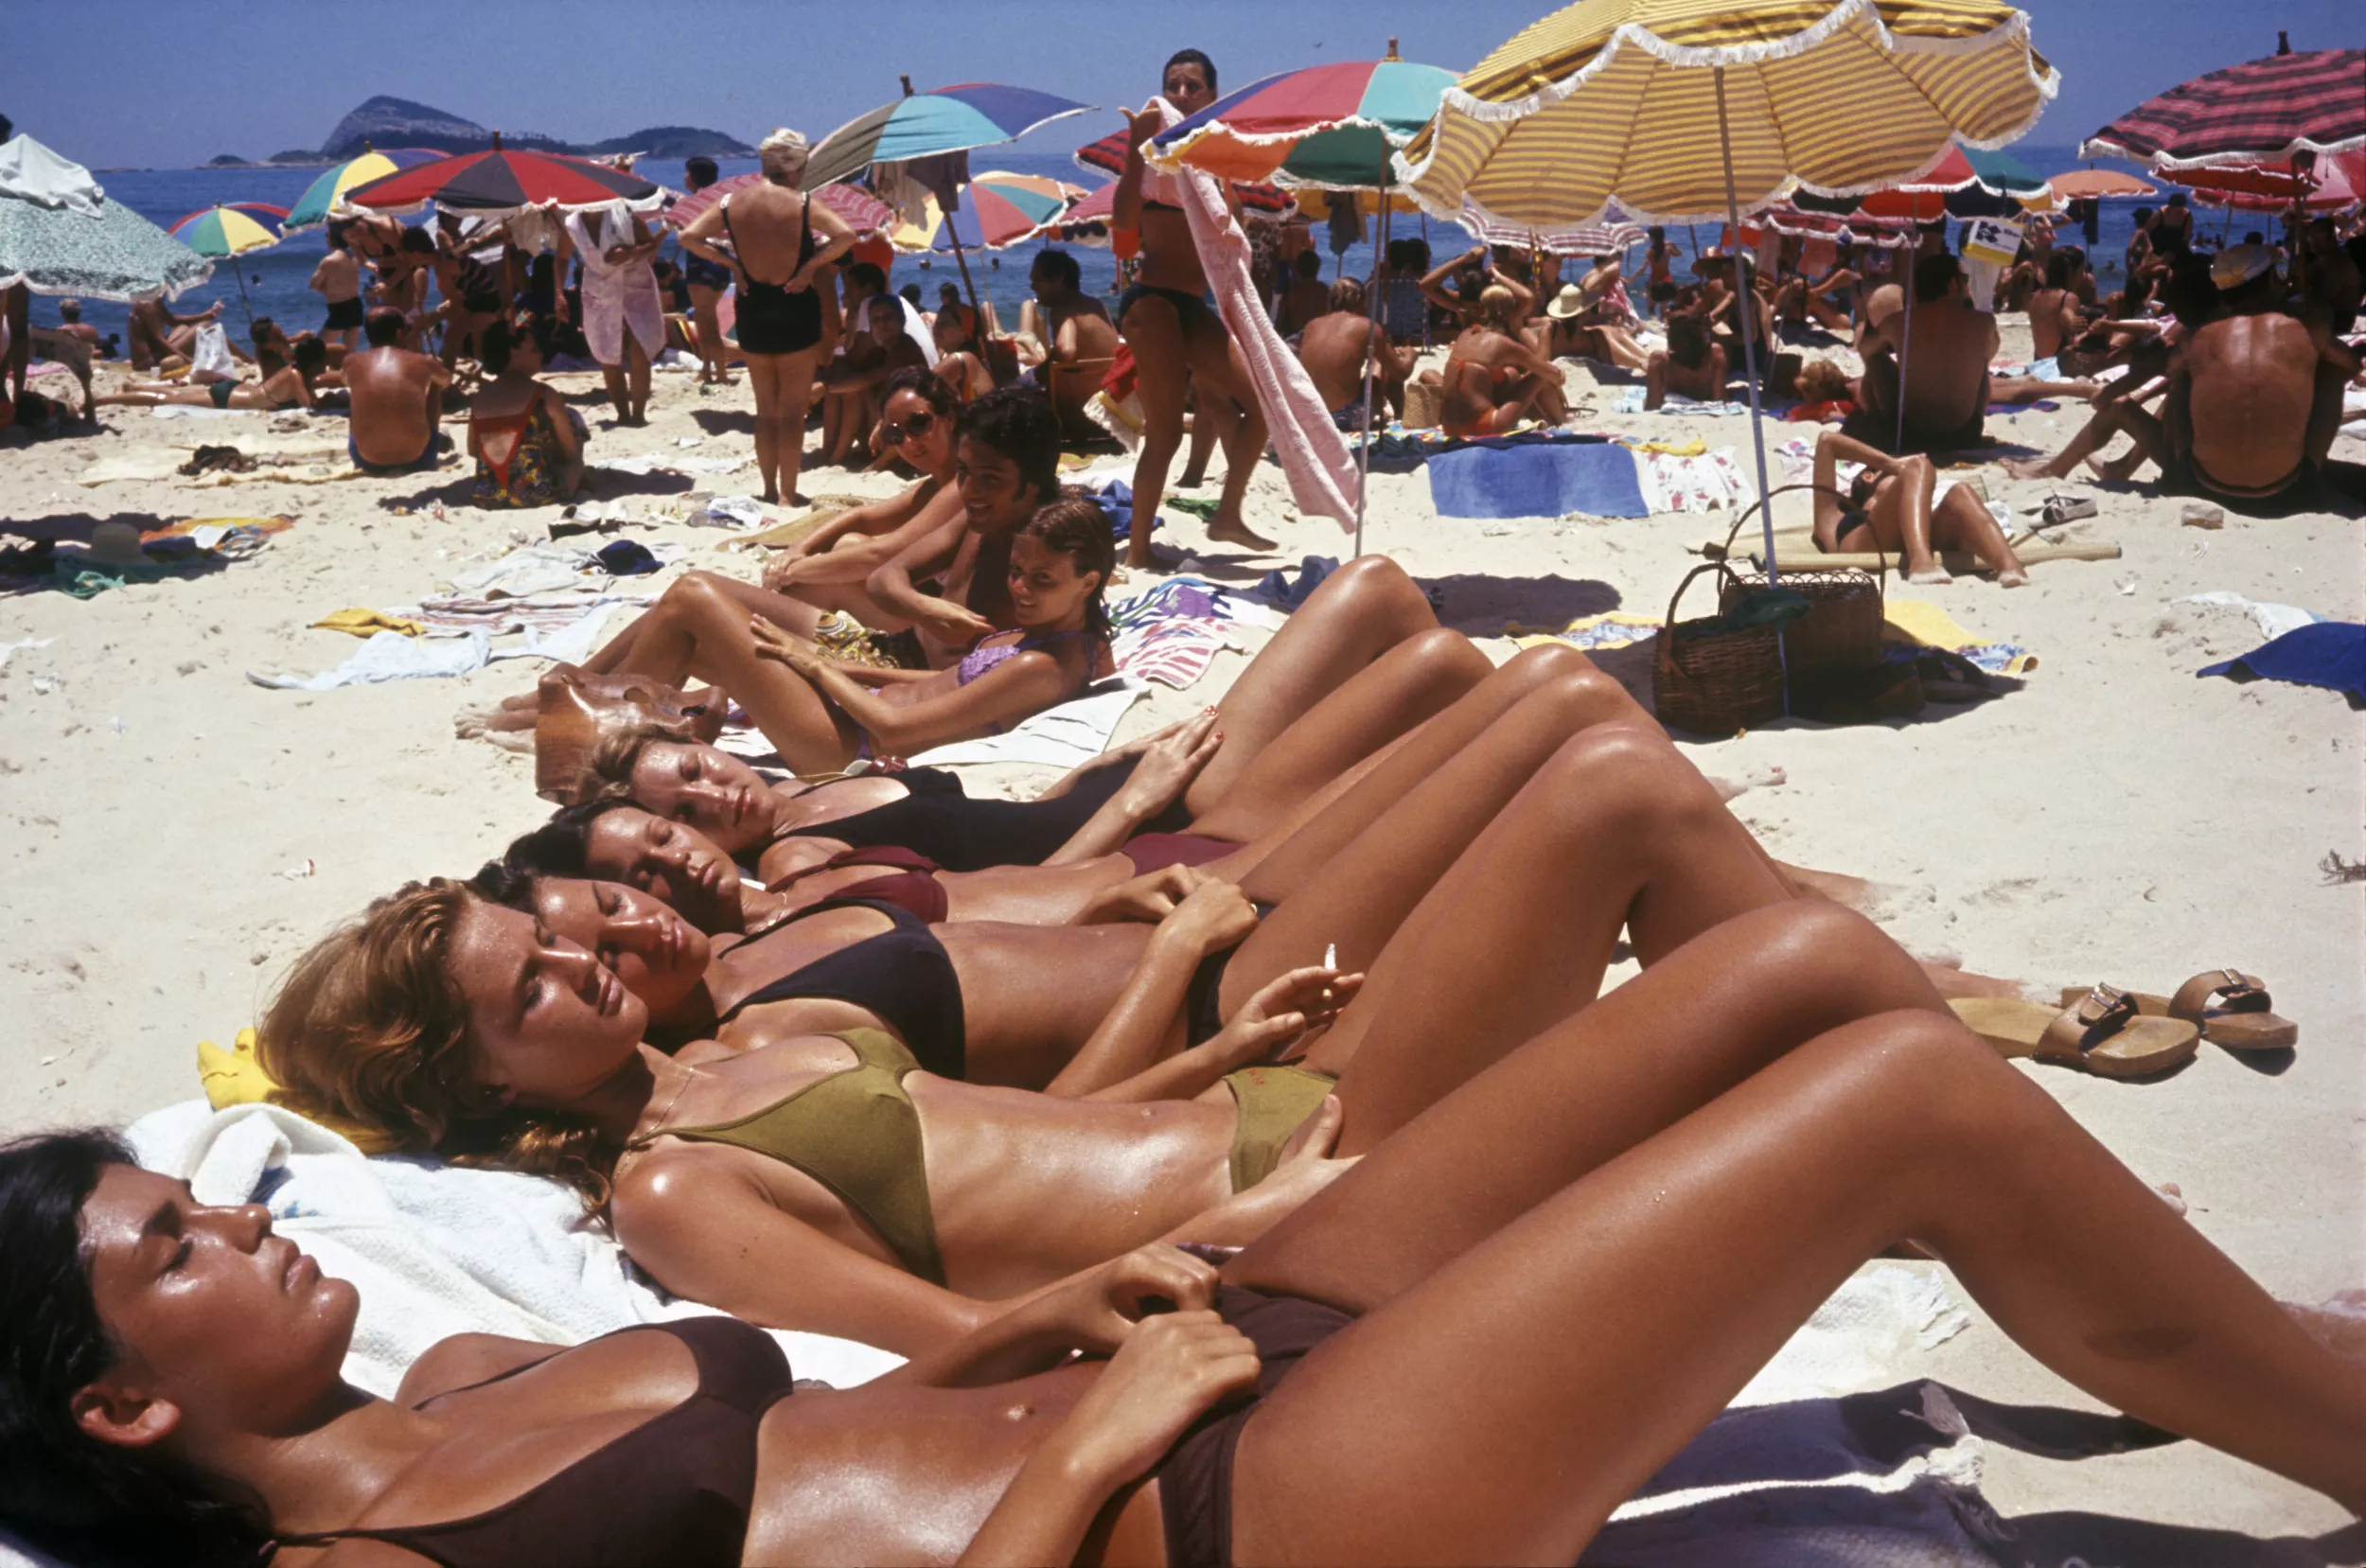 christy stock recommends Images Of Bikinis On The Beach